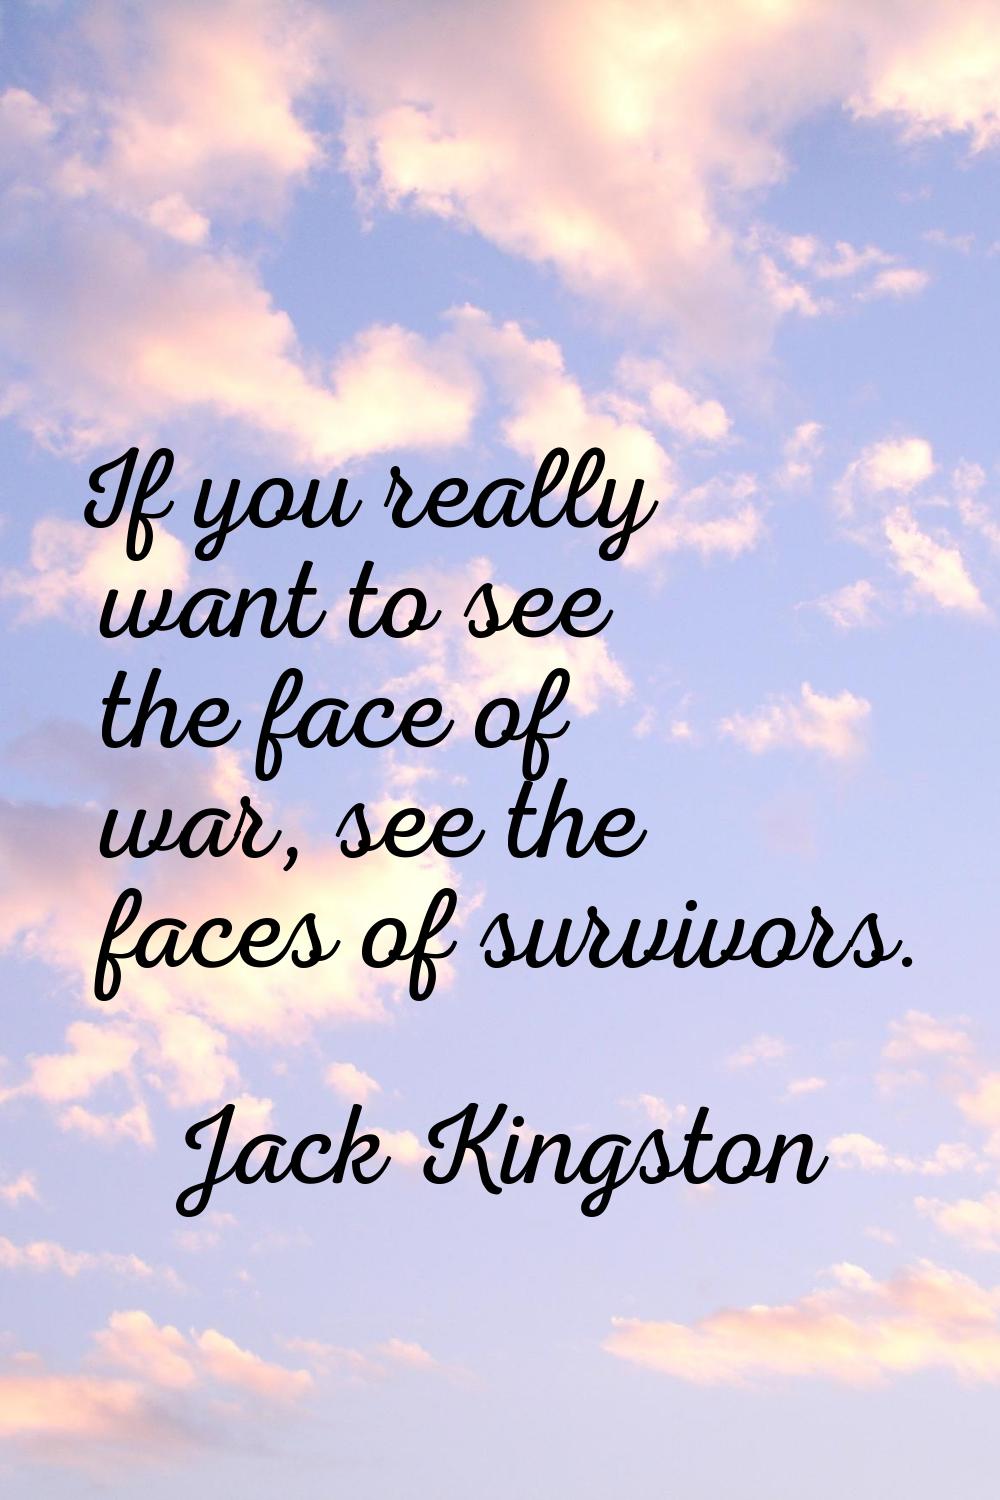 If you really want to see the face of war, see the faces of survivors.